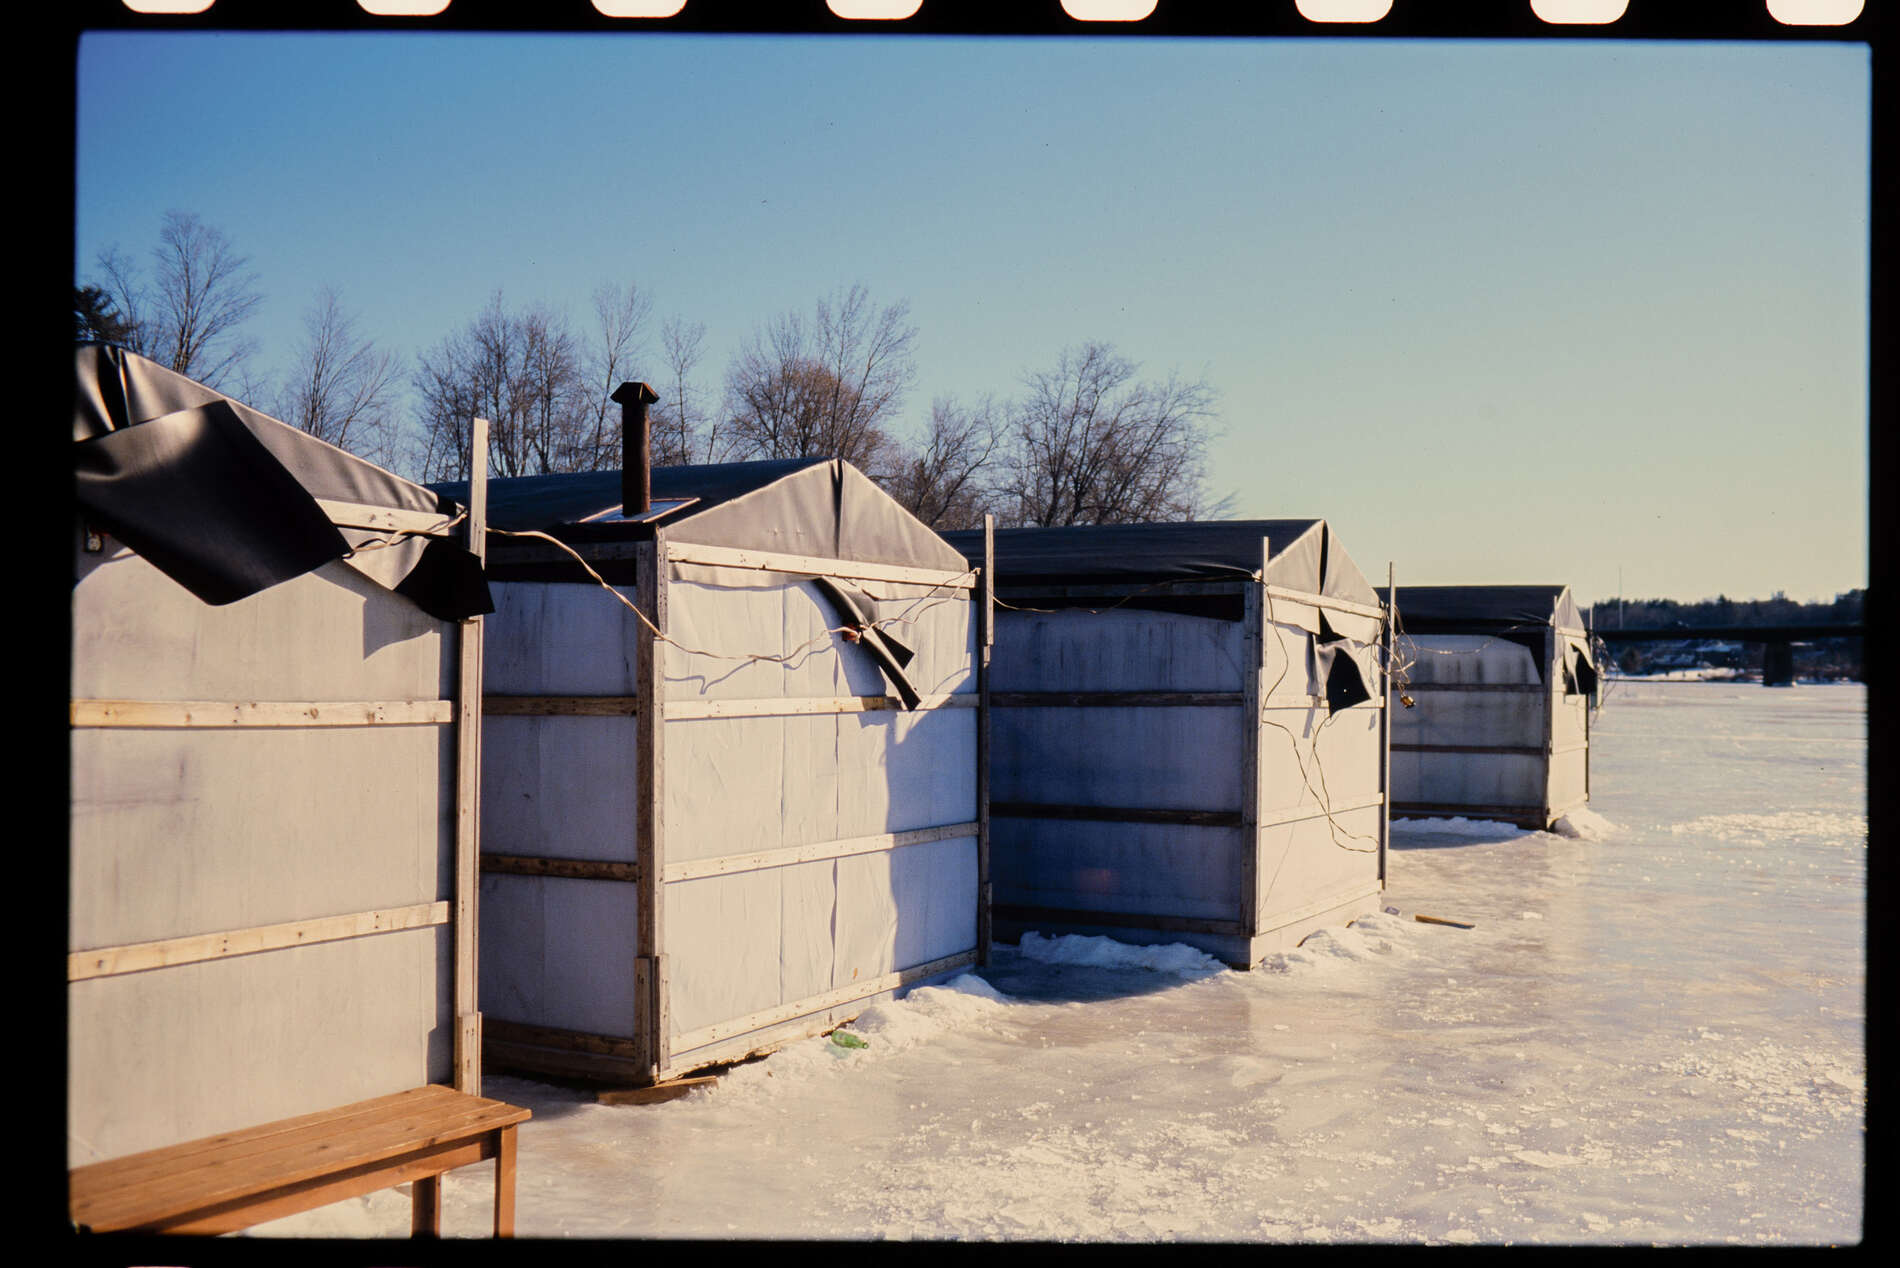 Smelting huts on a frozen river